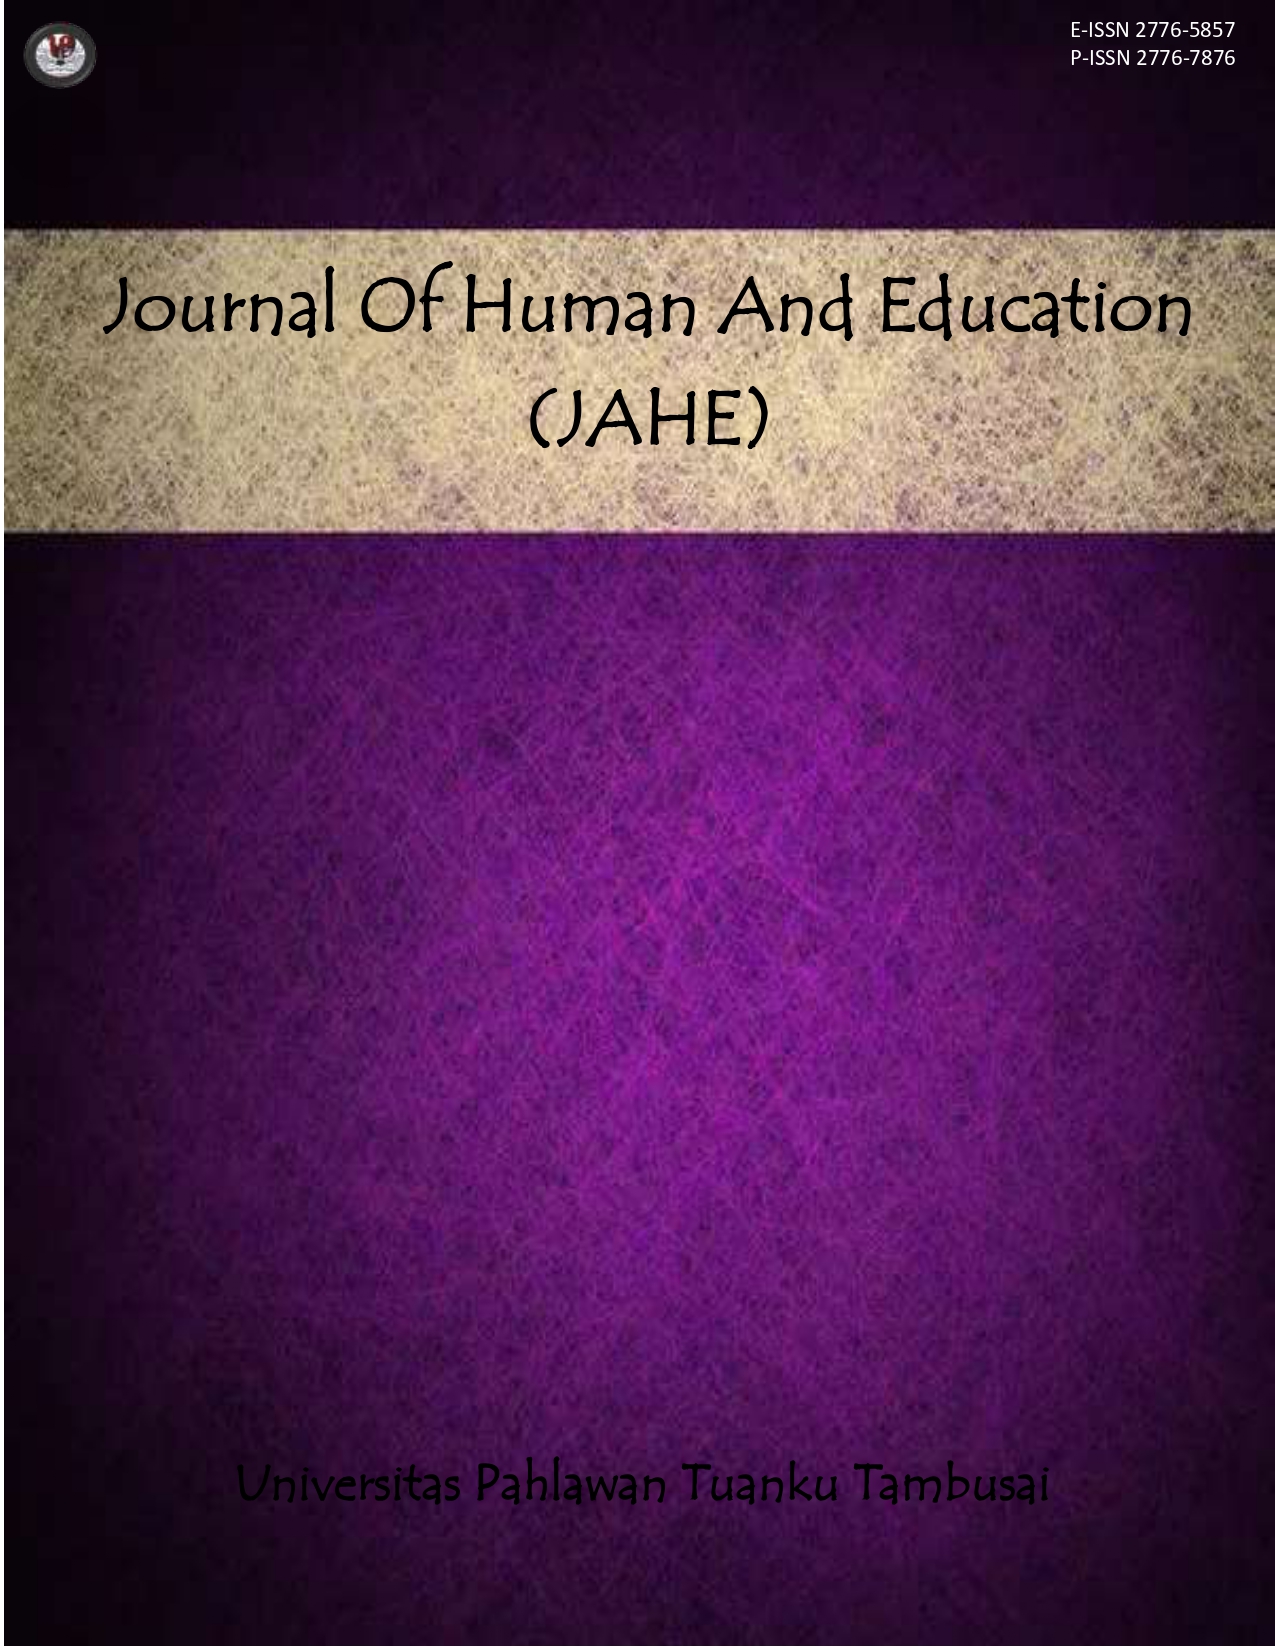 					View Vol. 1 No. 2 (2021): Journal of Human And Education (JAHE)
				